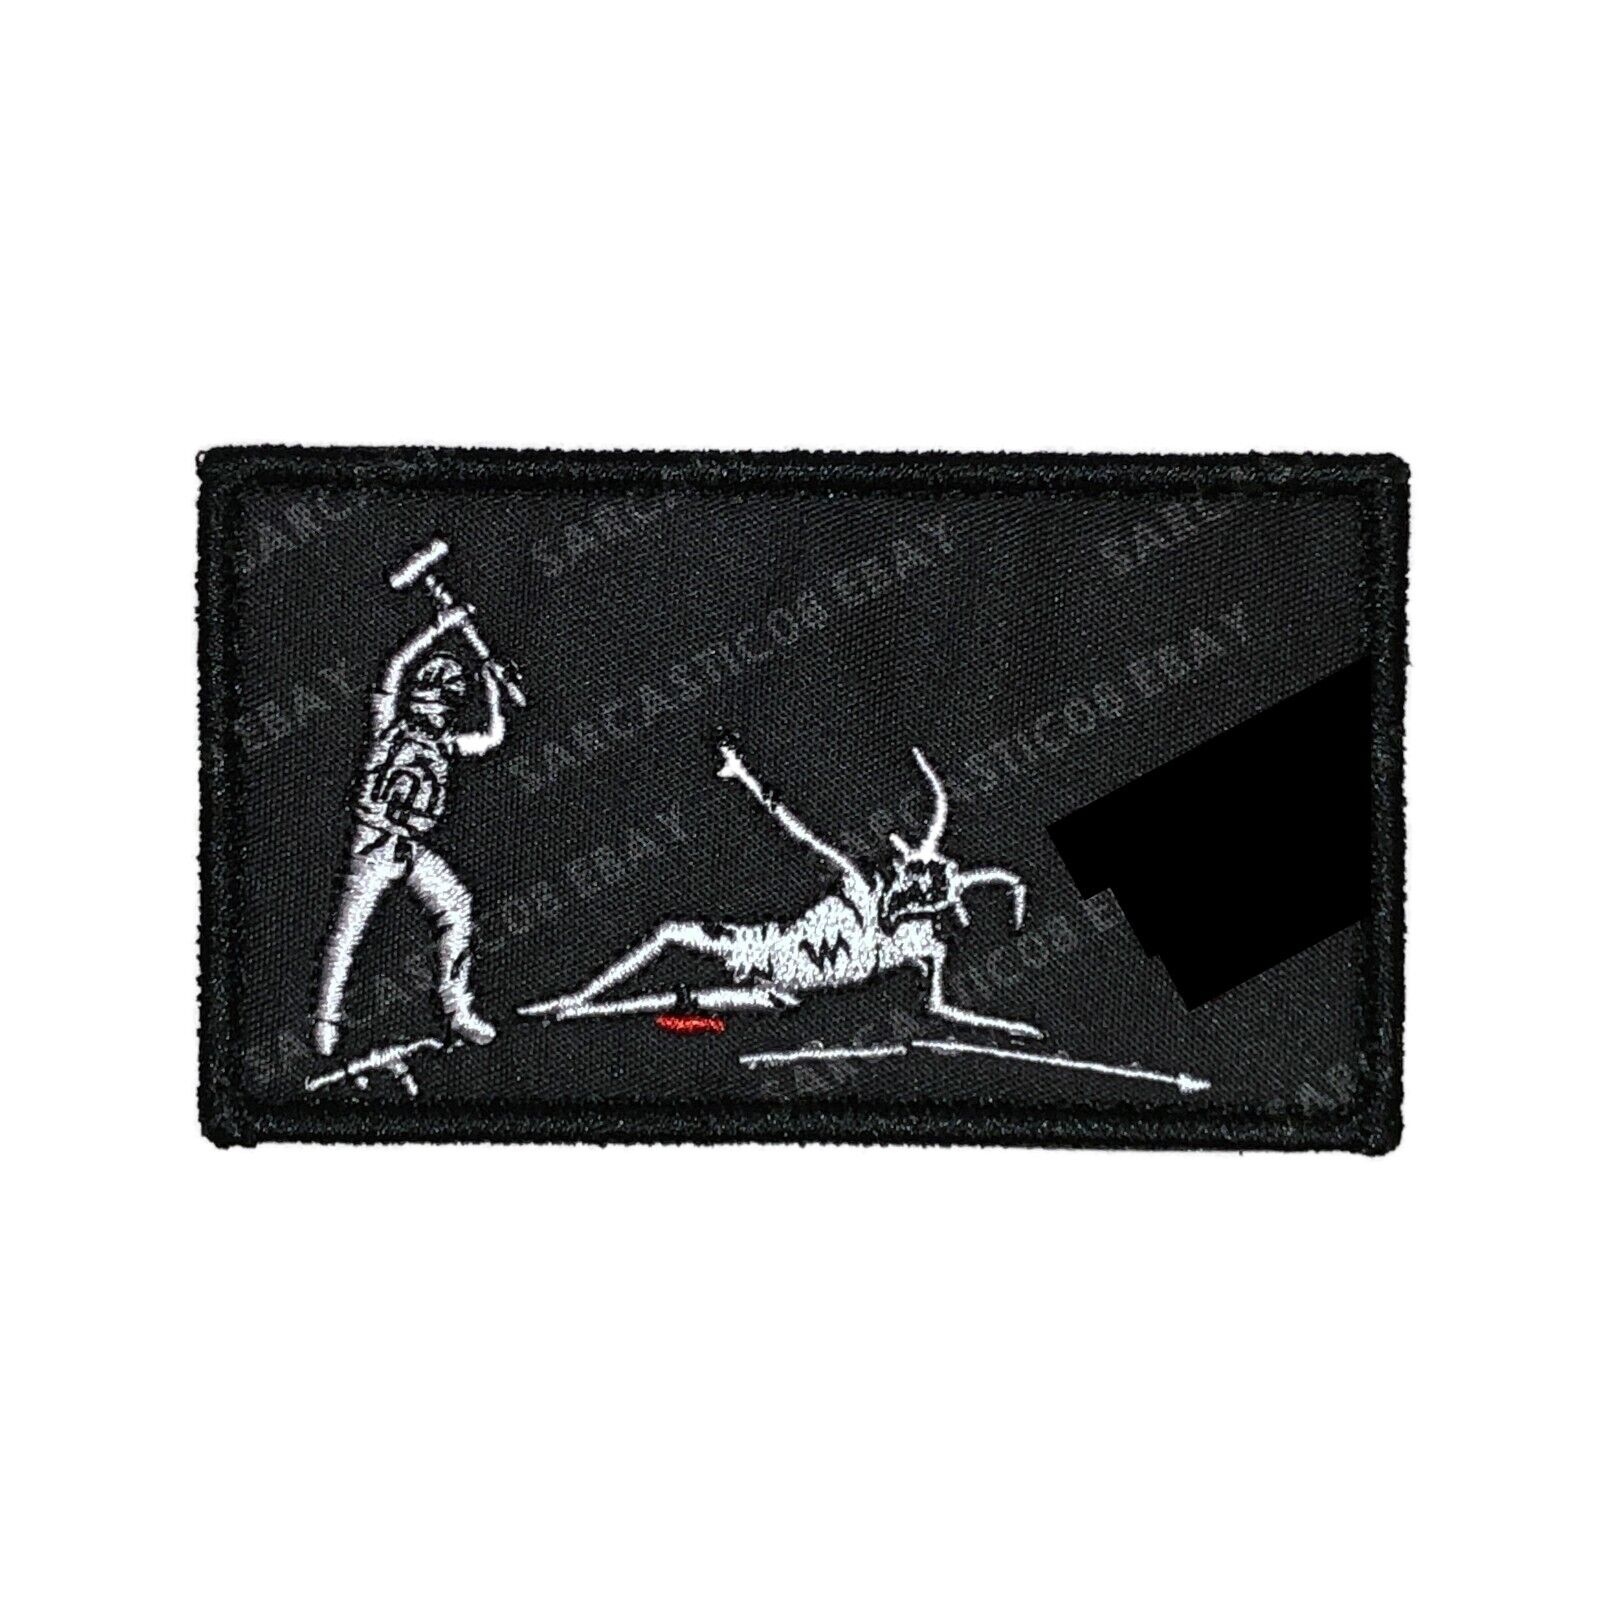 Forward Observations Group Patch Superior Defense GBRS Wasteland Kooks One7Six